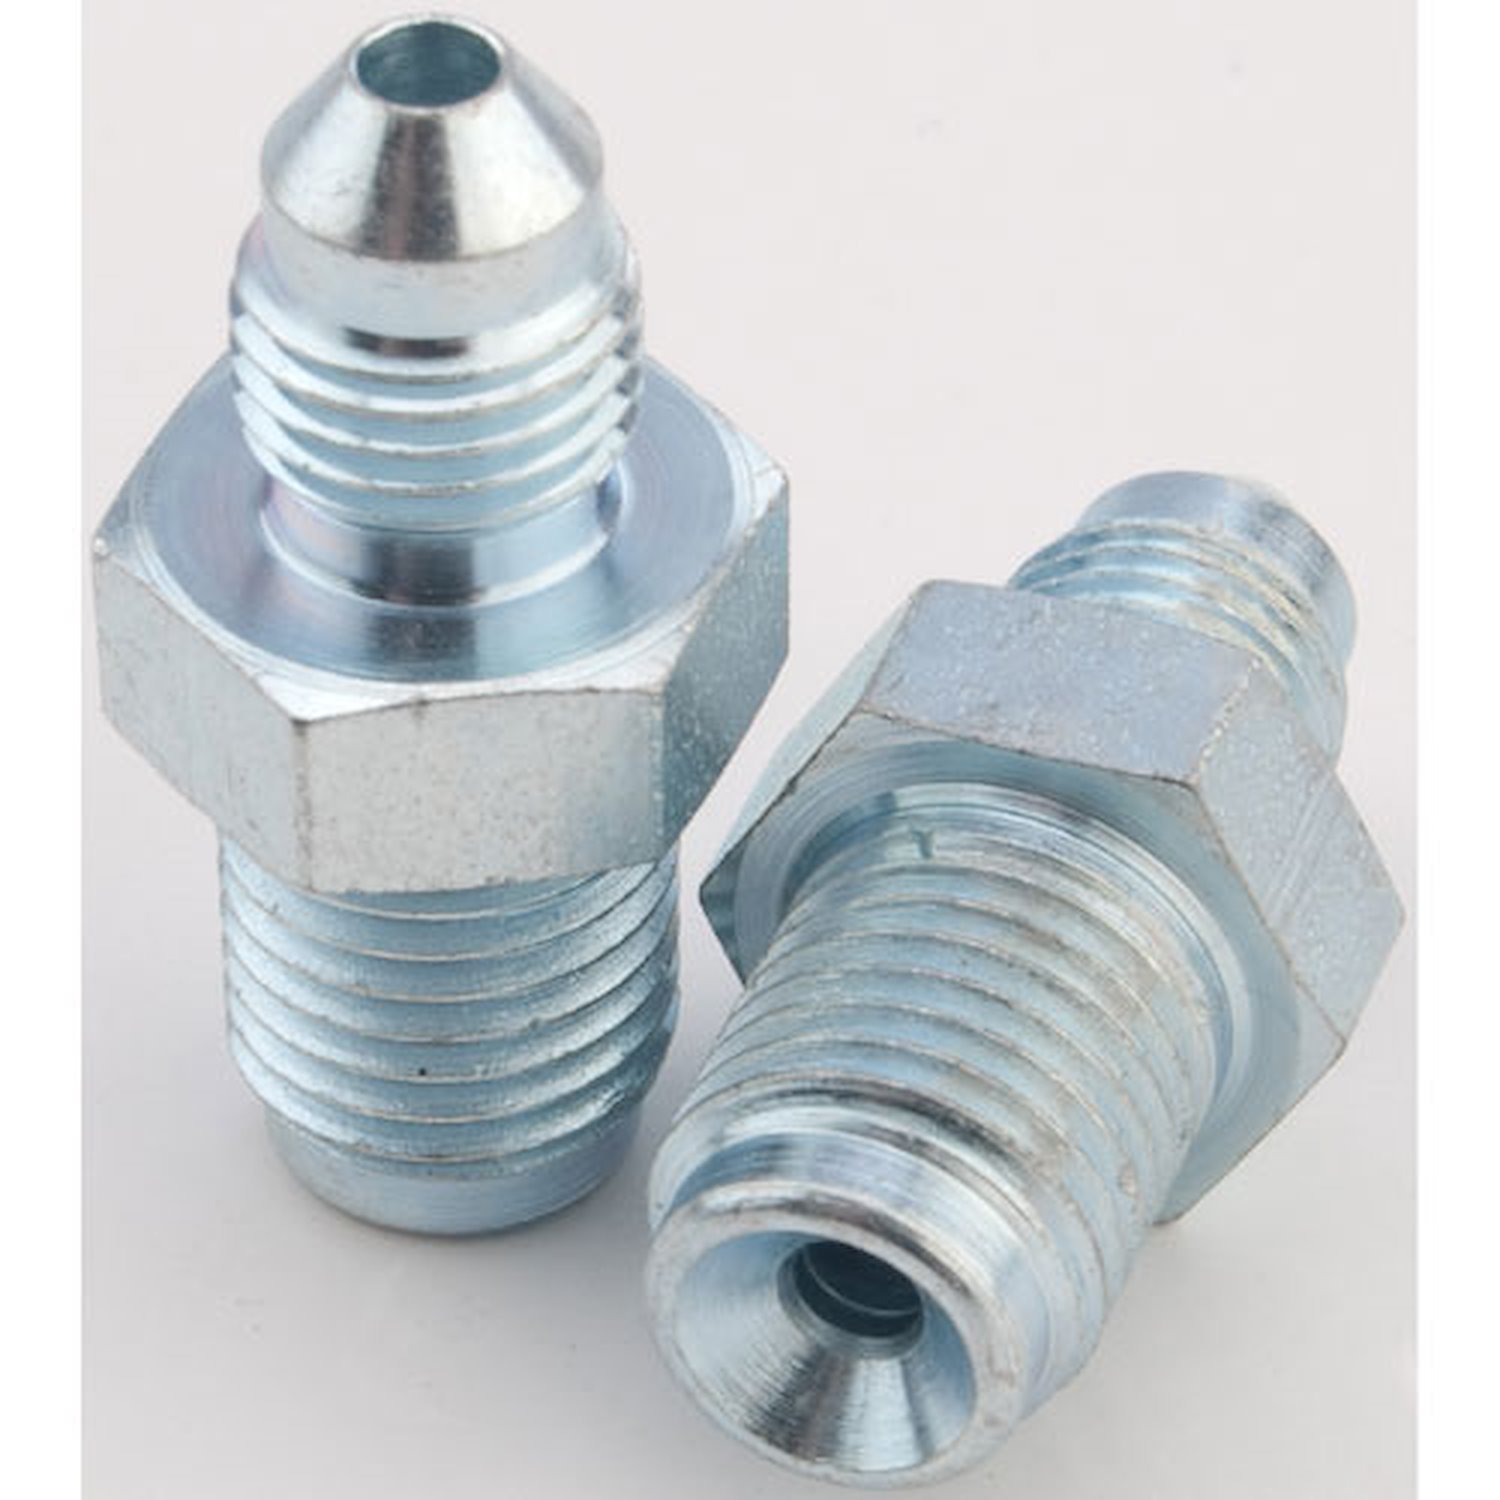 AN to Inverted Flare Male Brake Adapter Fittings [-3 AN x 7/16 in.-20 Male Inverted Flare]